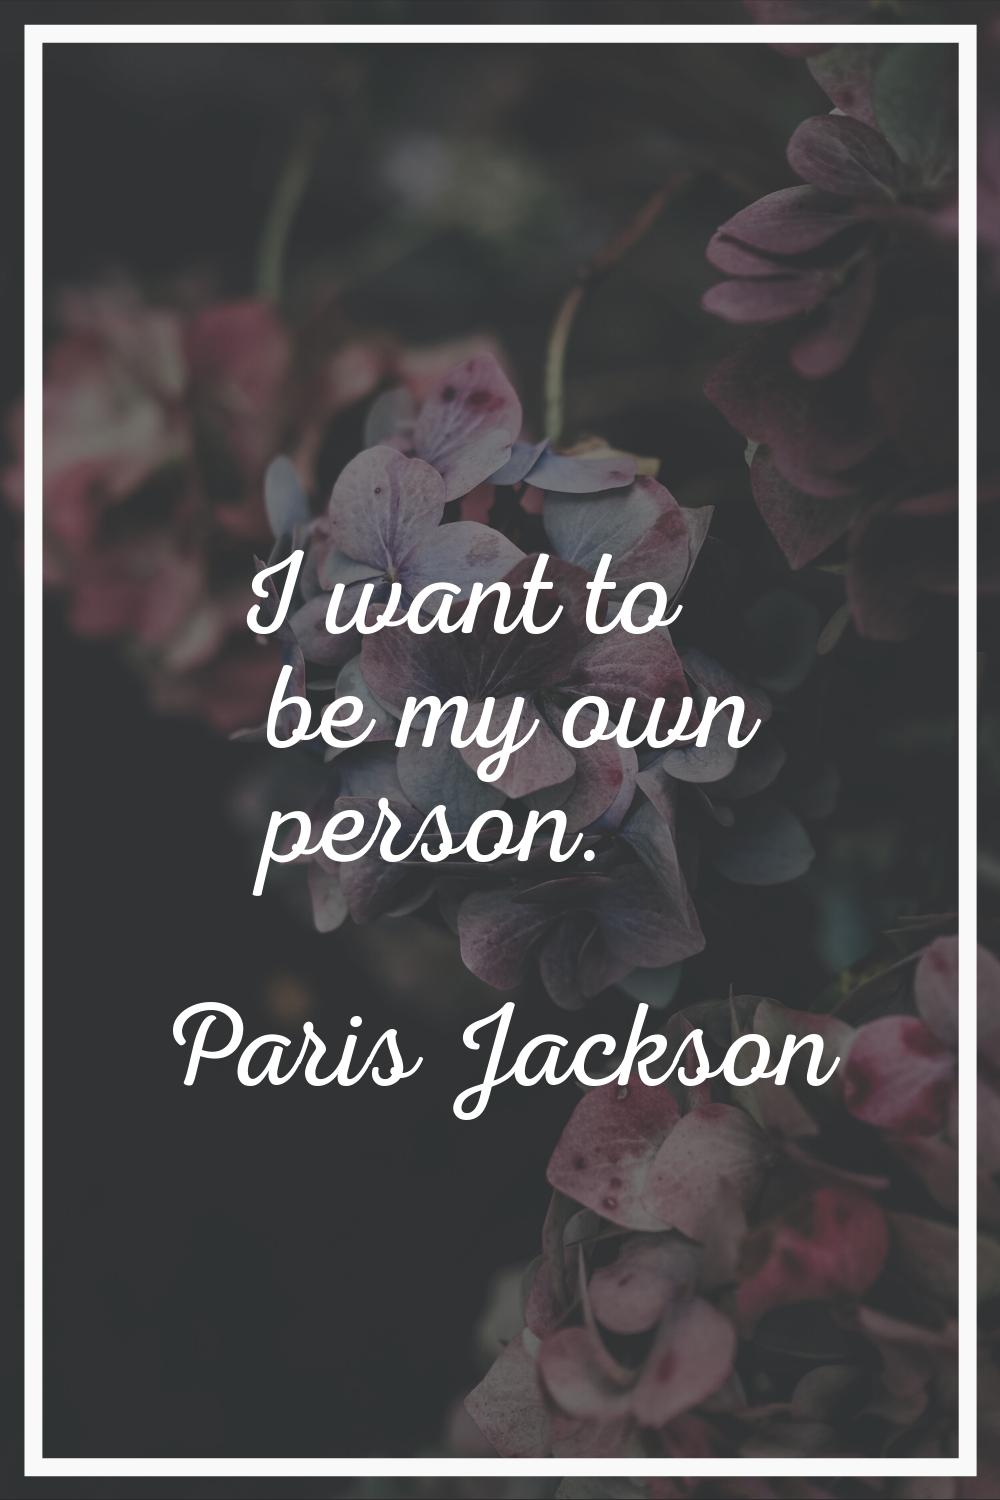 I want to be my own person.